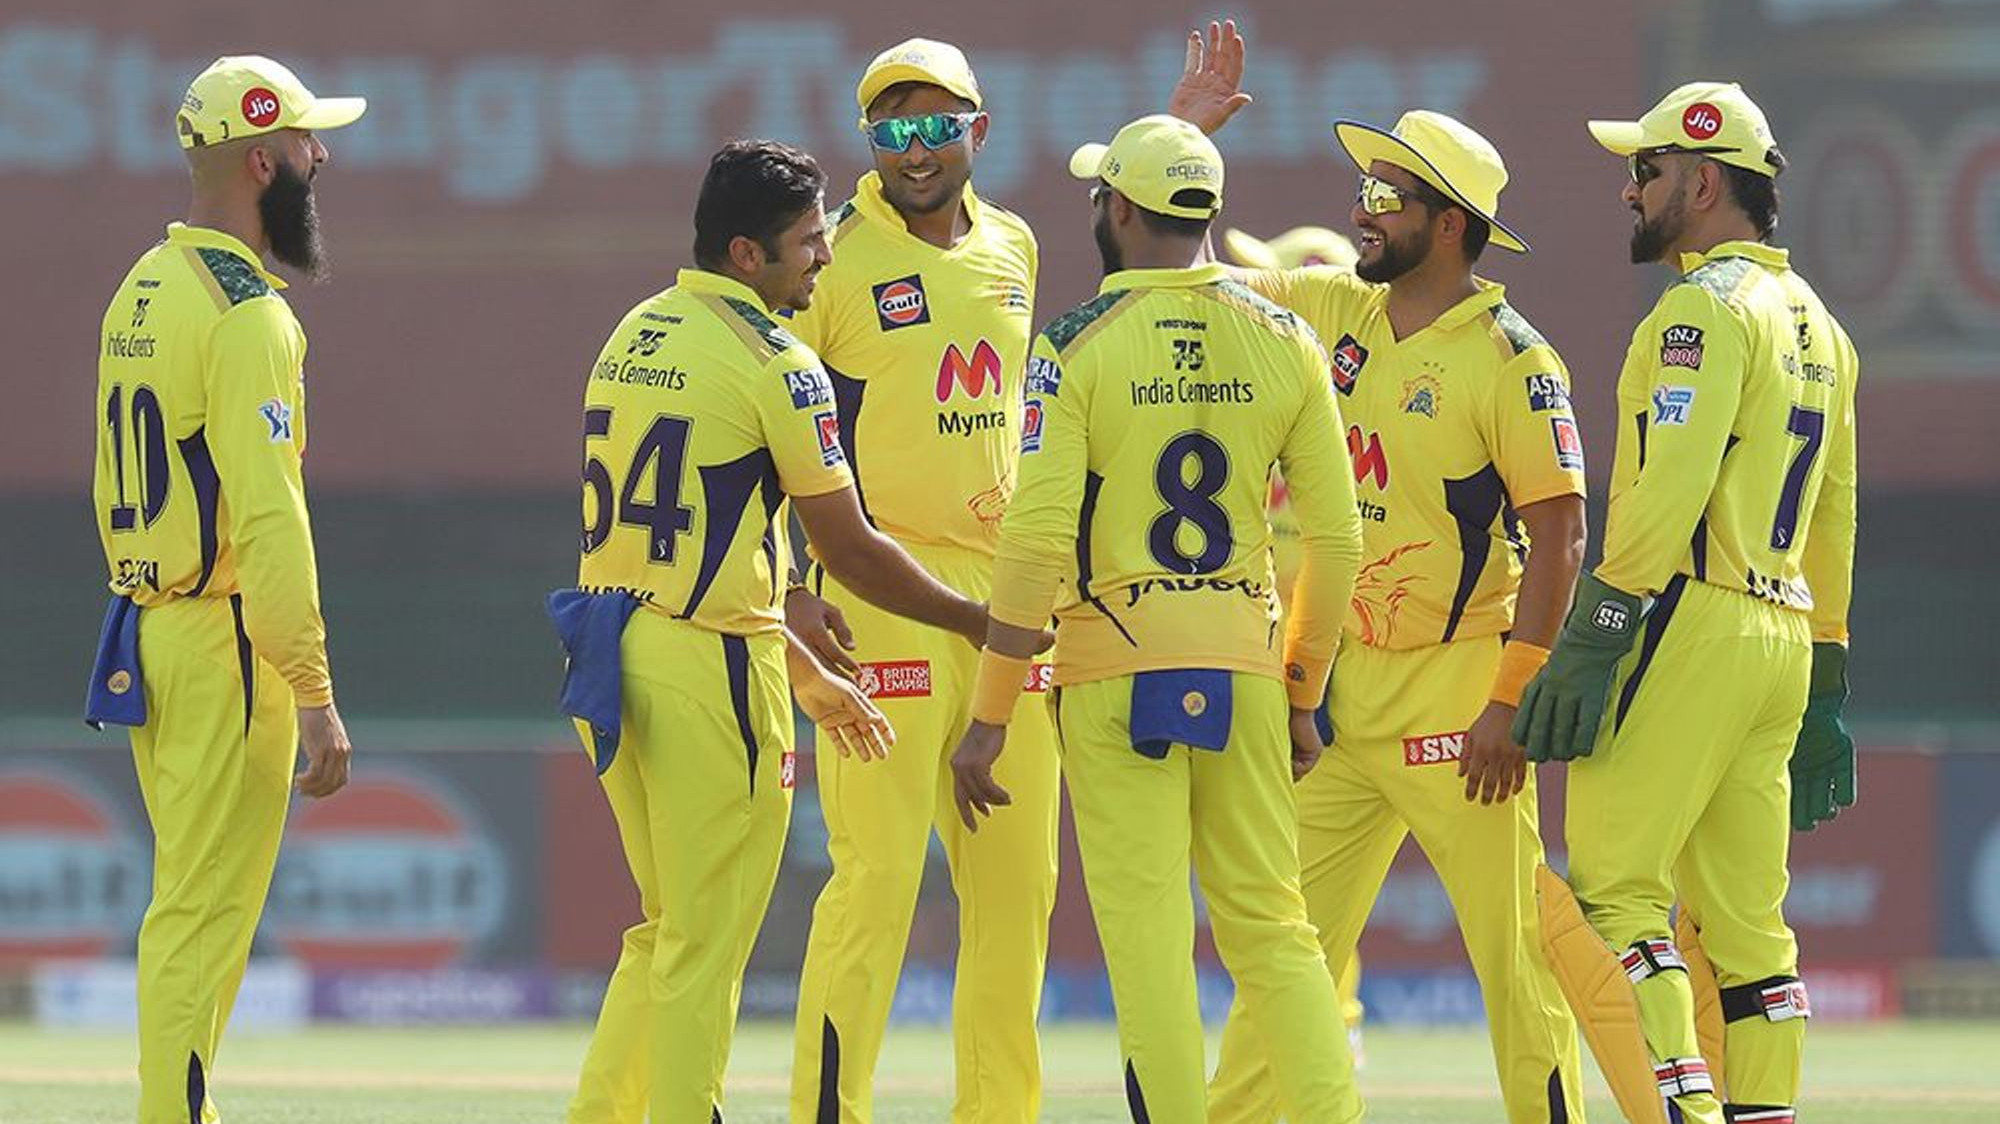 IPL 2021: “It is enjoyable when you don't do so well and still win”, MS Dhoni after CSK’s thrilling win over KKR